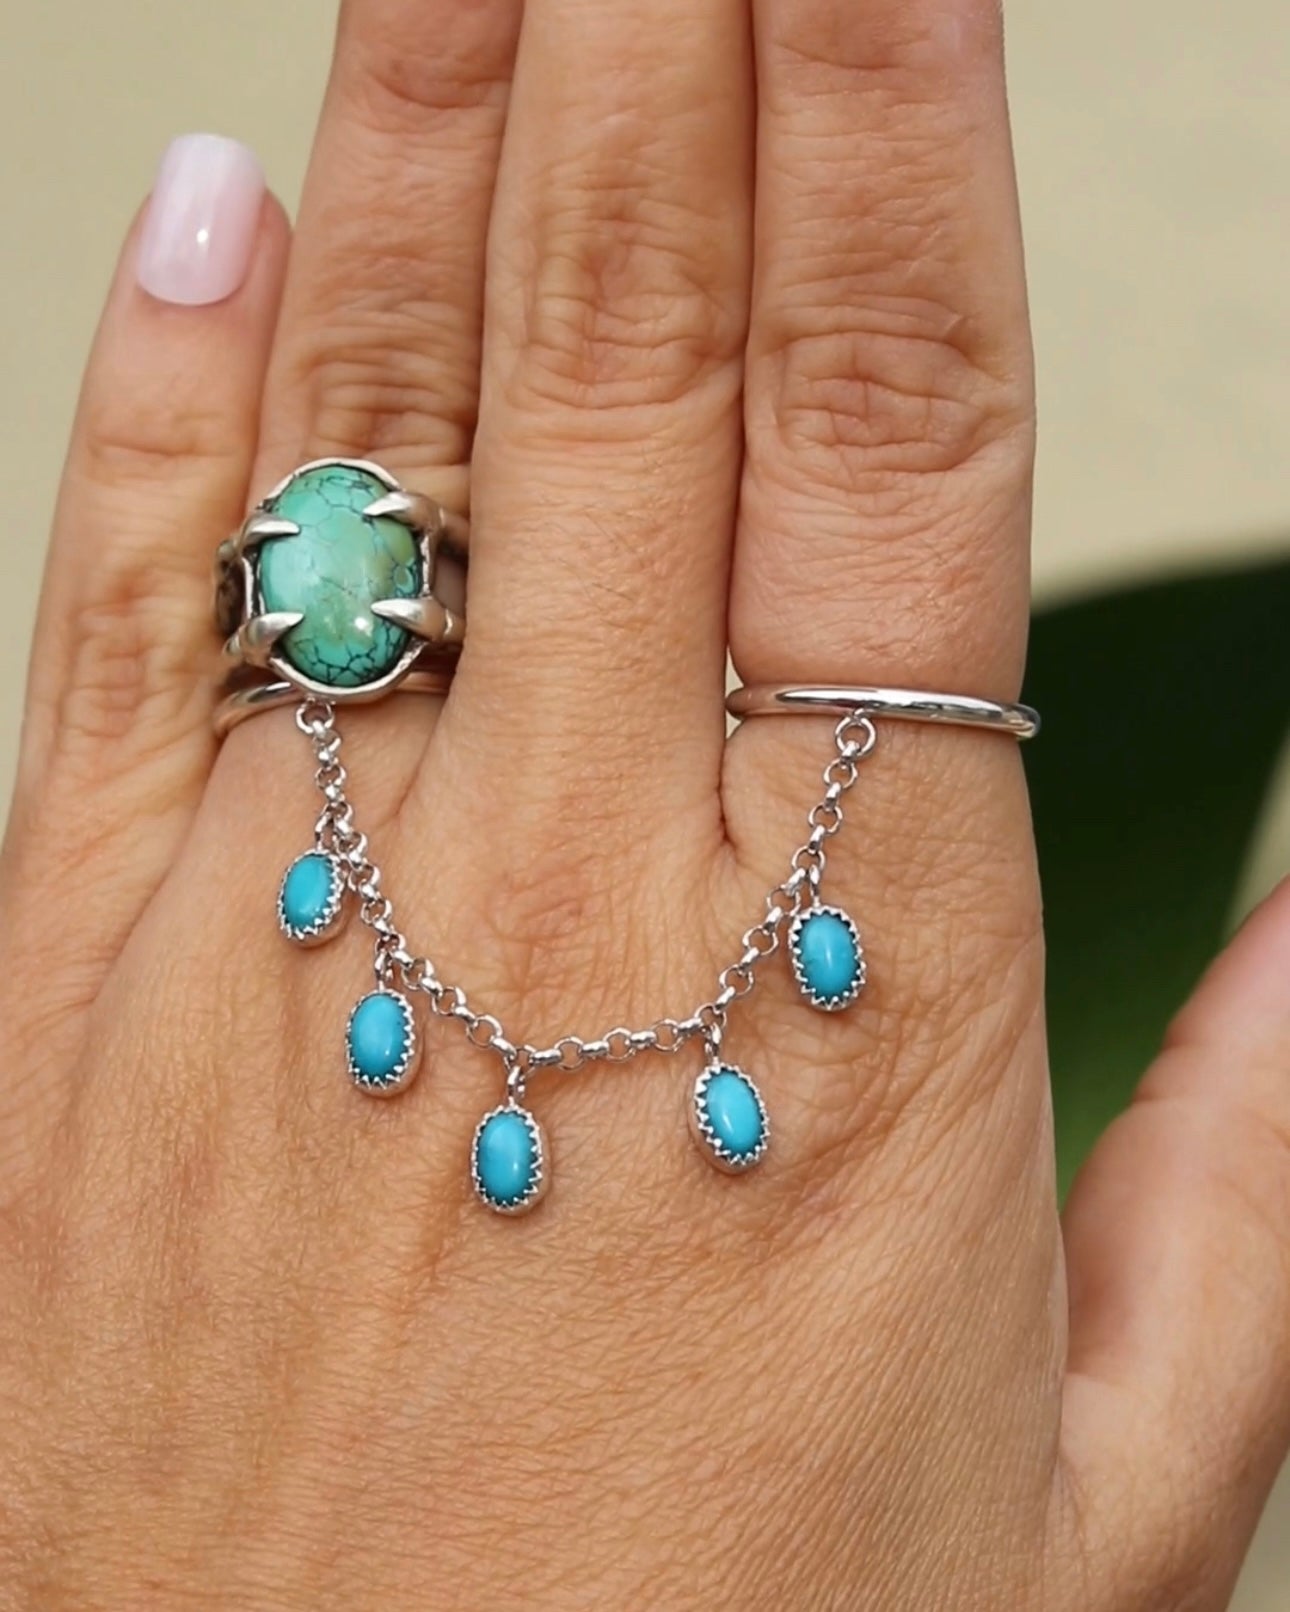 Turquoise Chain Ring. Size 7 and 8 (can be resized)